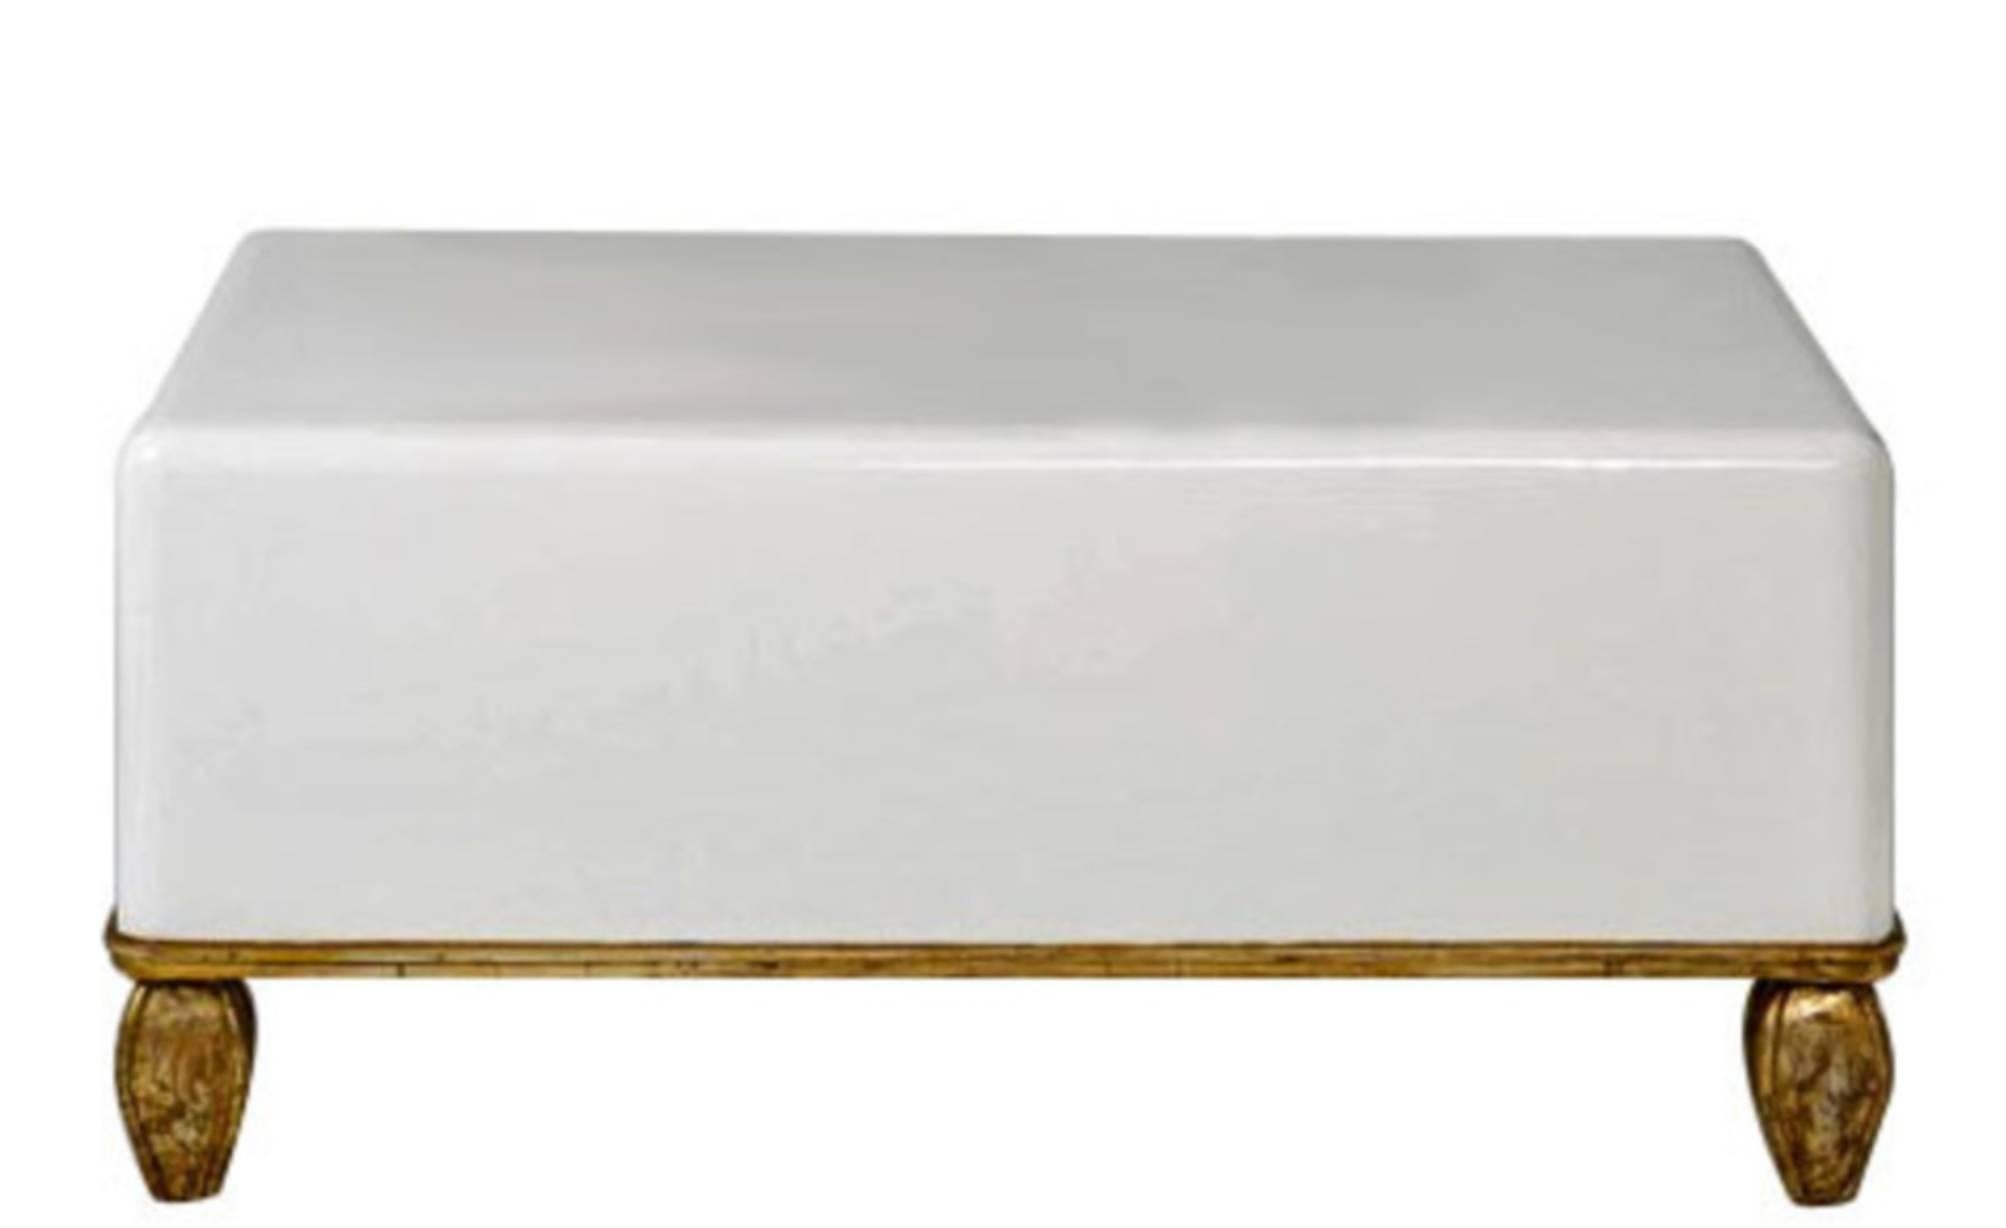 White lacquer and gilded coffee table from the Tara Shaw Maison collection with high-gloss standard finish variations available. Handcrafted in New Orleans. Standard finishes in gold leaf, white lacquer and black lacquer.

Custom dimensions and